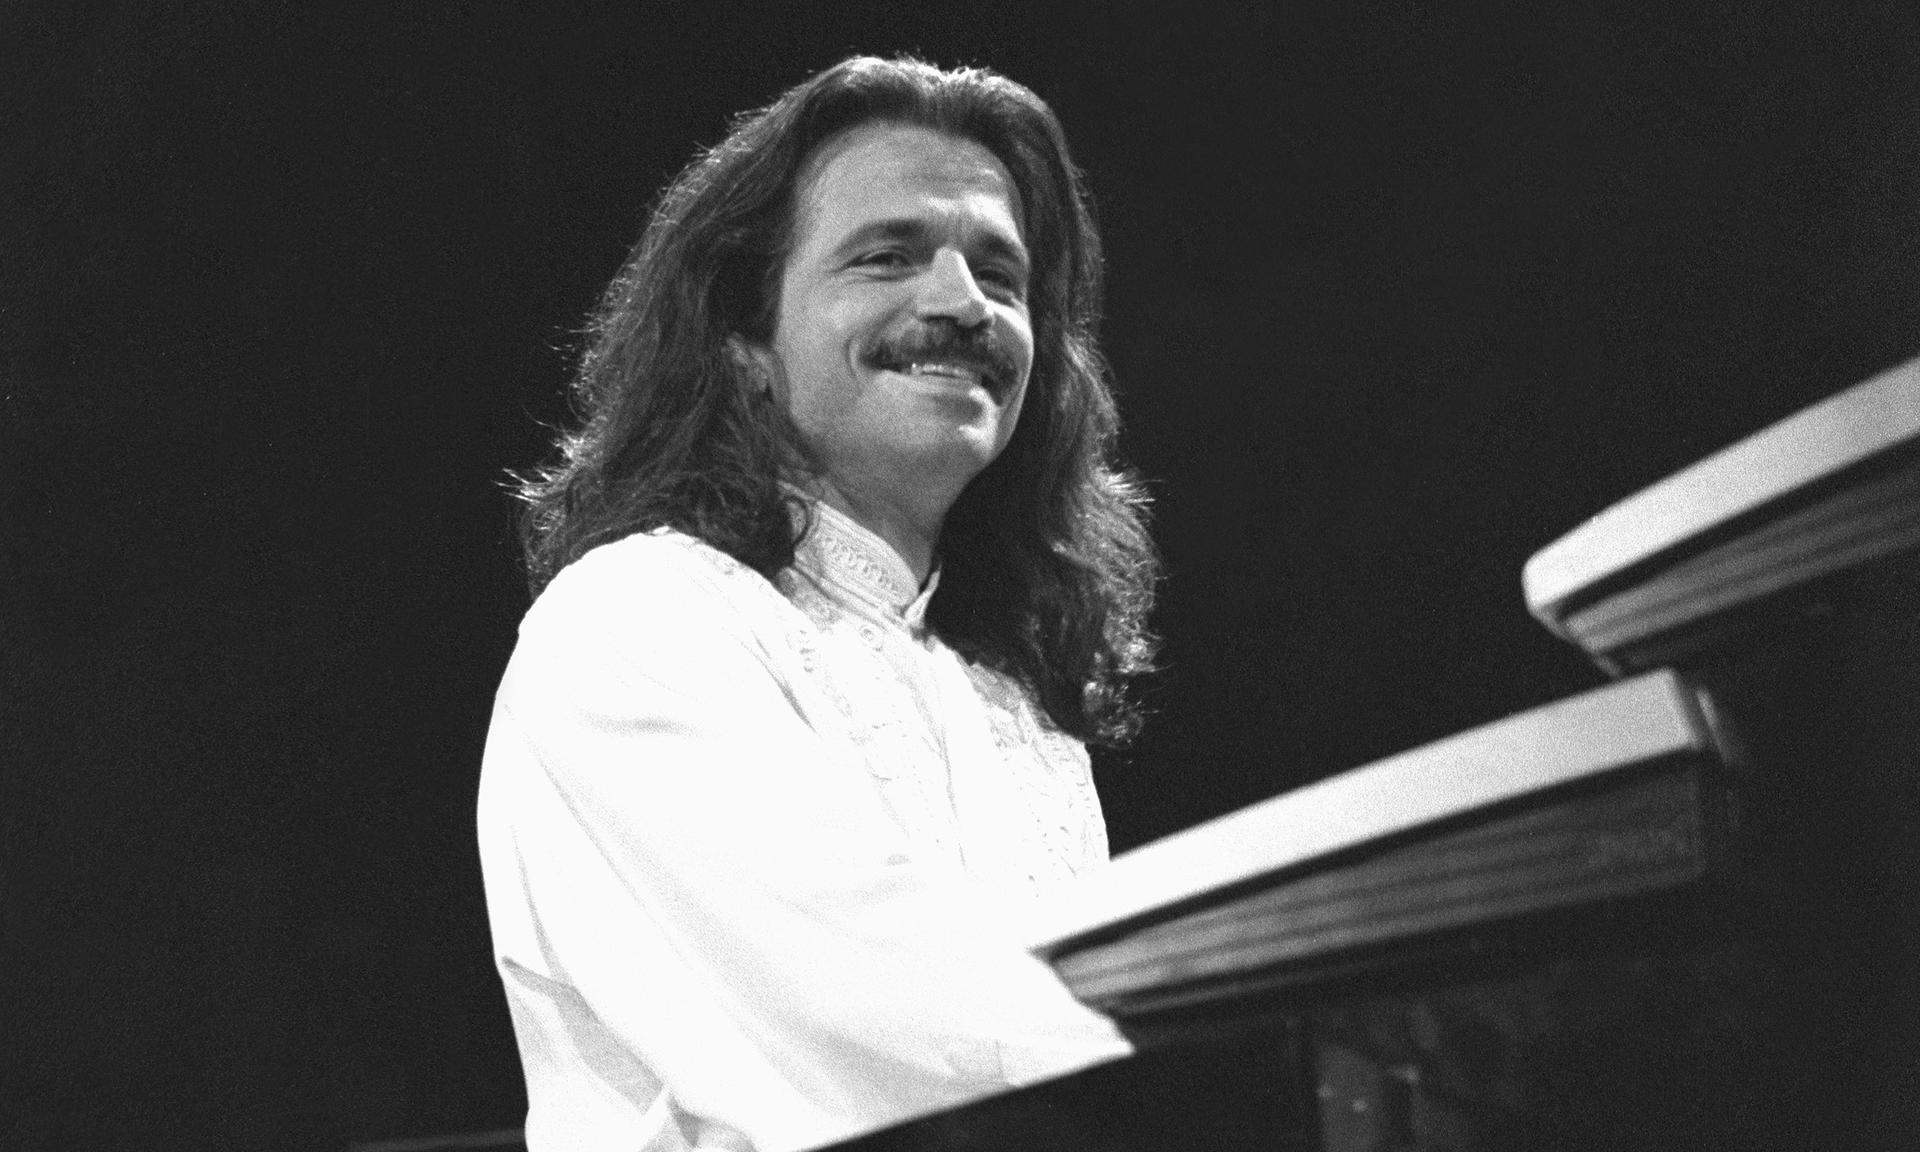 Yanni performing “Live at the Acropolis.”